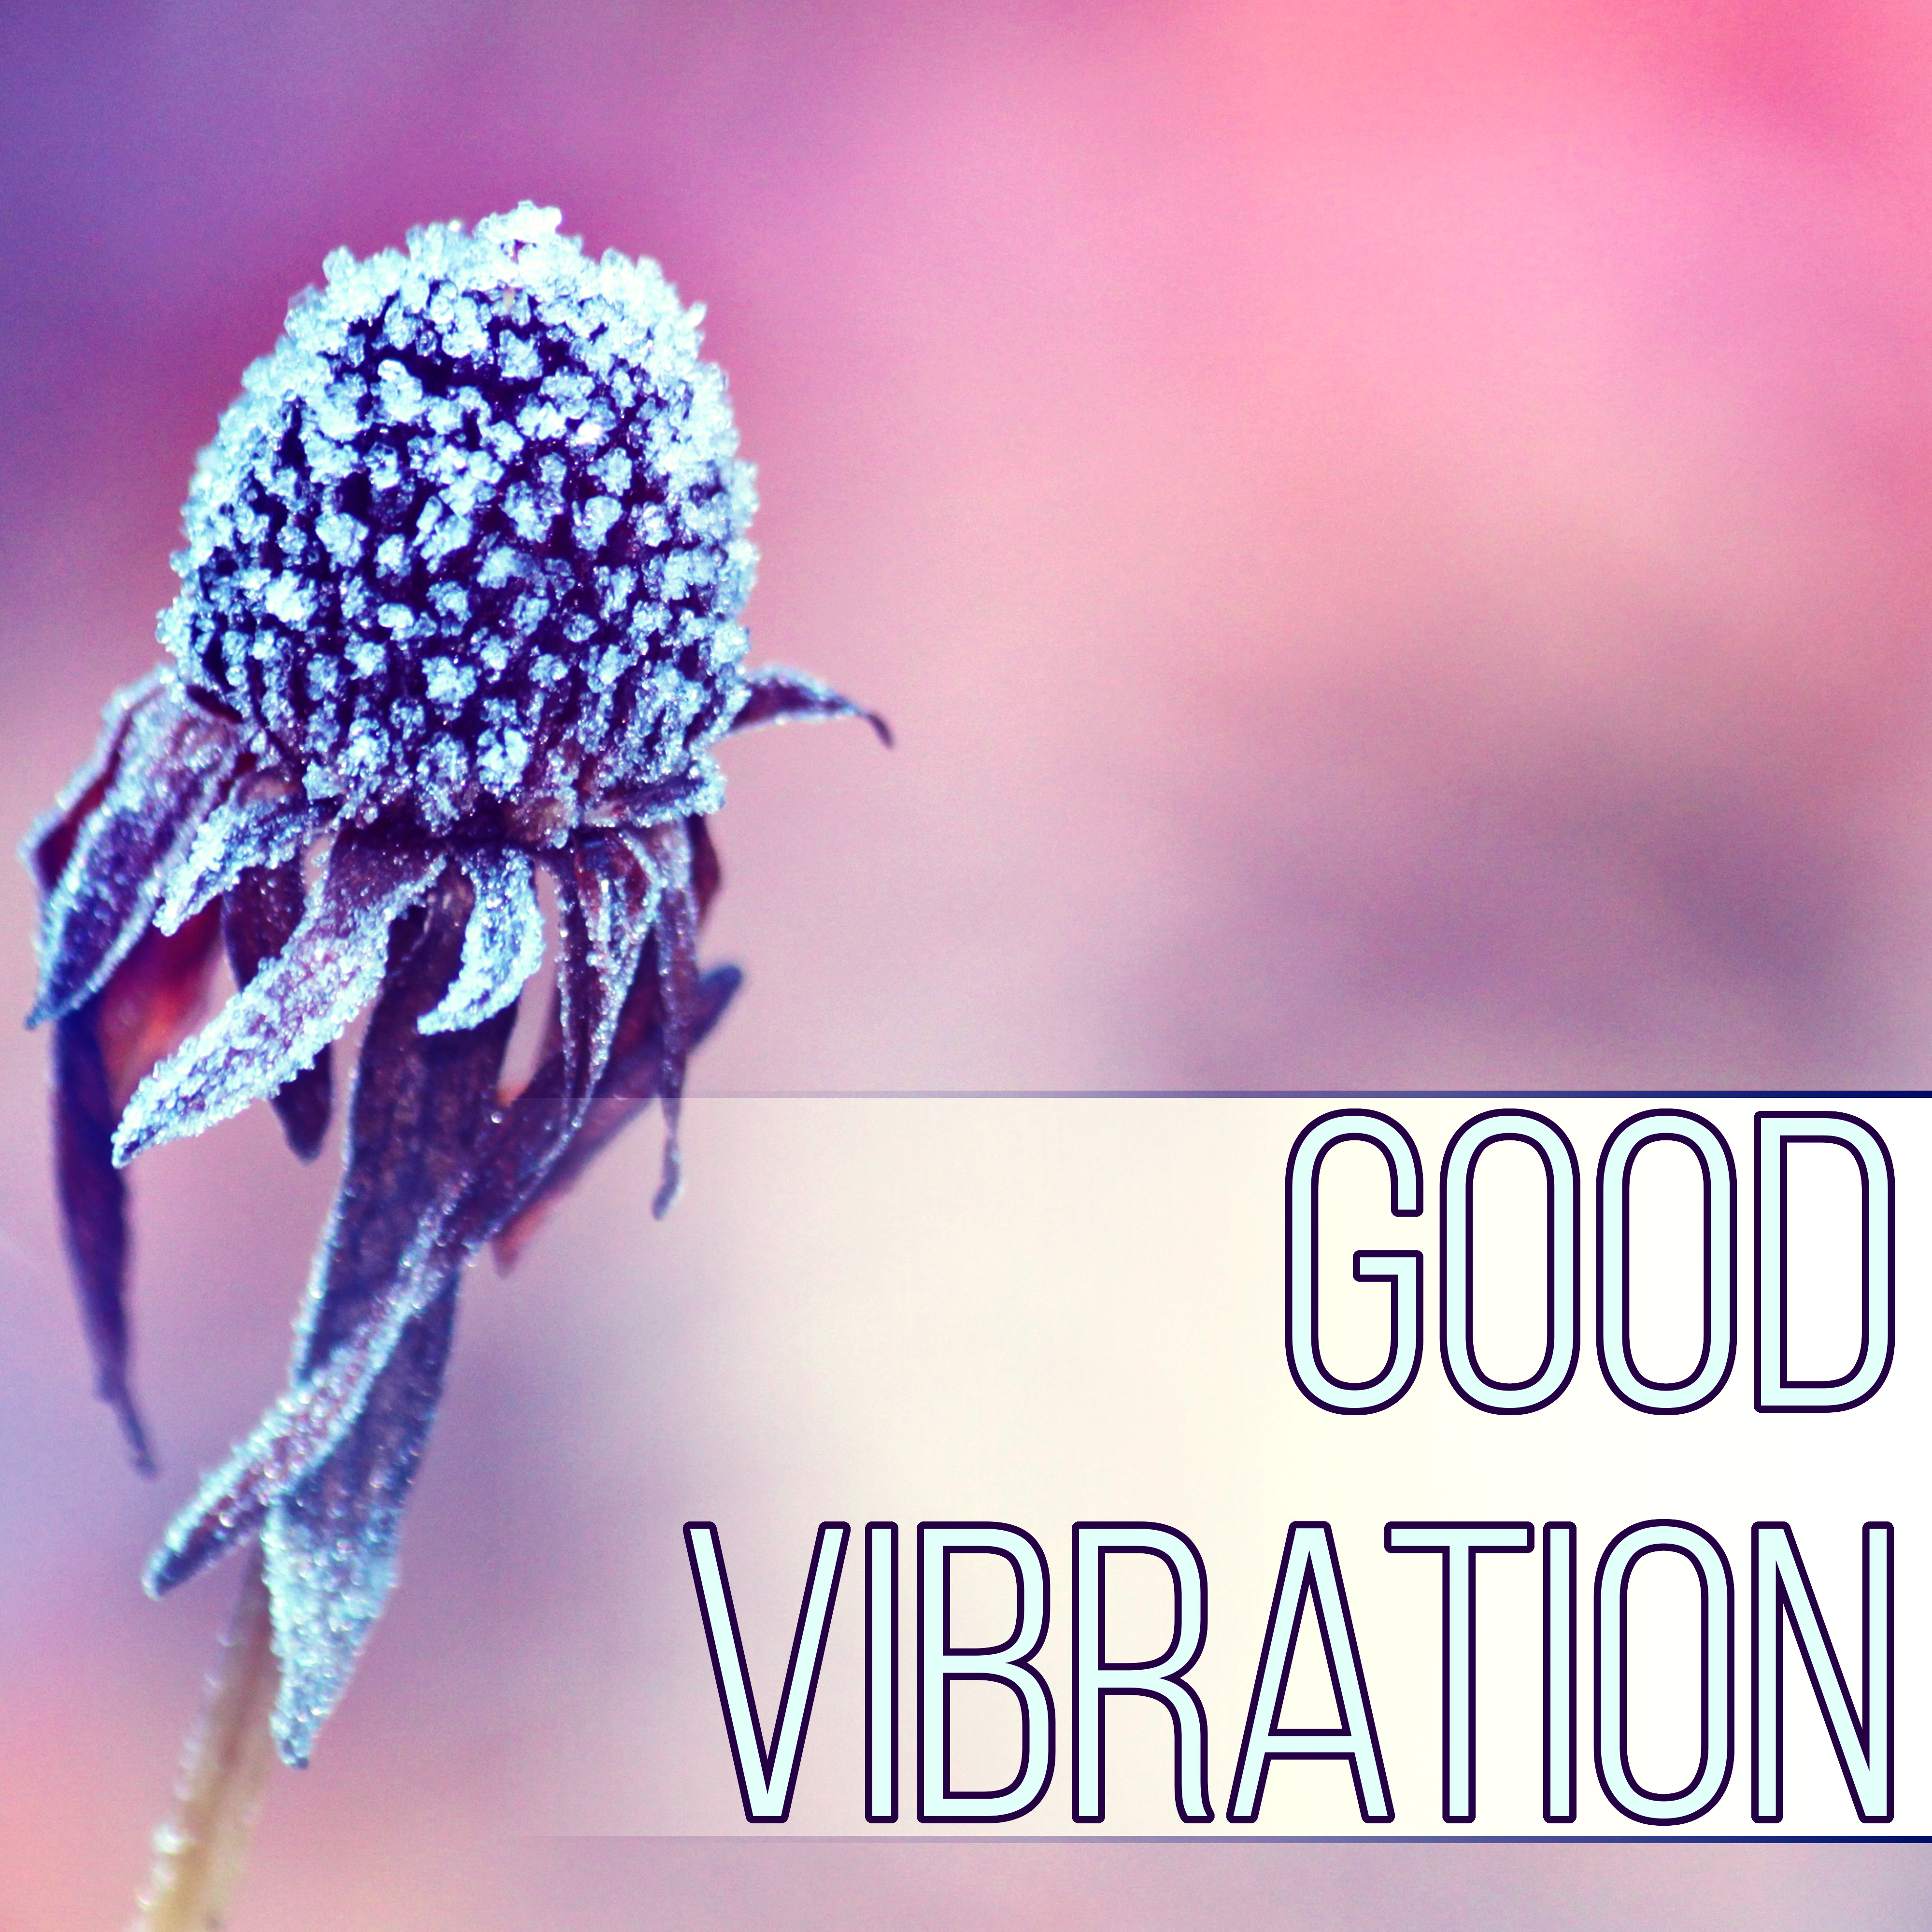 Good Vibrations – New Age Music for Beauty Salon and Spa, Relaxation, Massage, Acupressure, Aromatherapy, Beautiful and Healthy Body, Healing Power, Well Being, Rest After Work with Nature Sounds